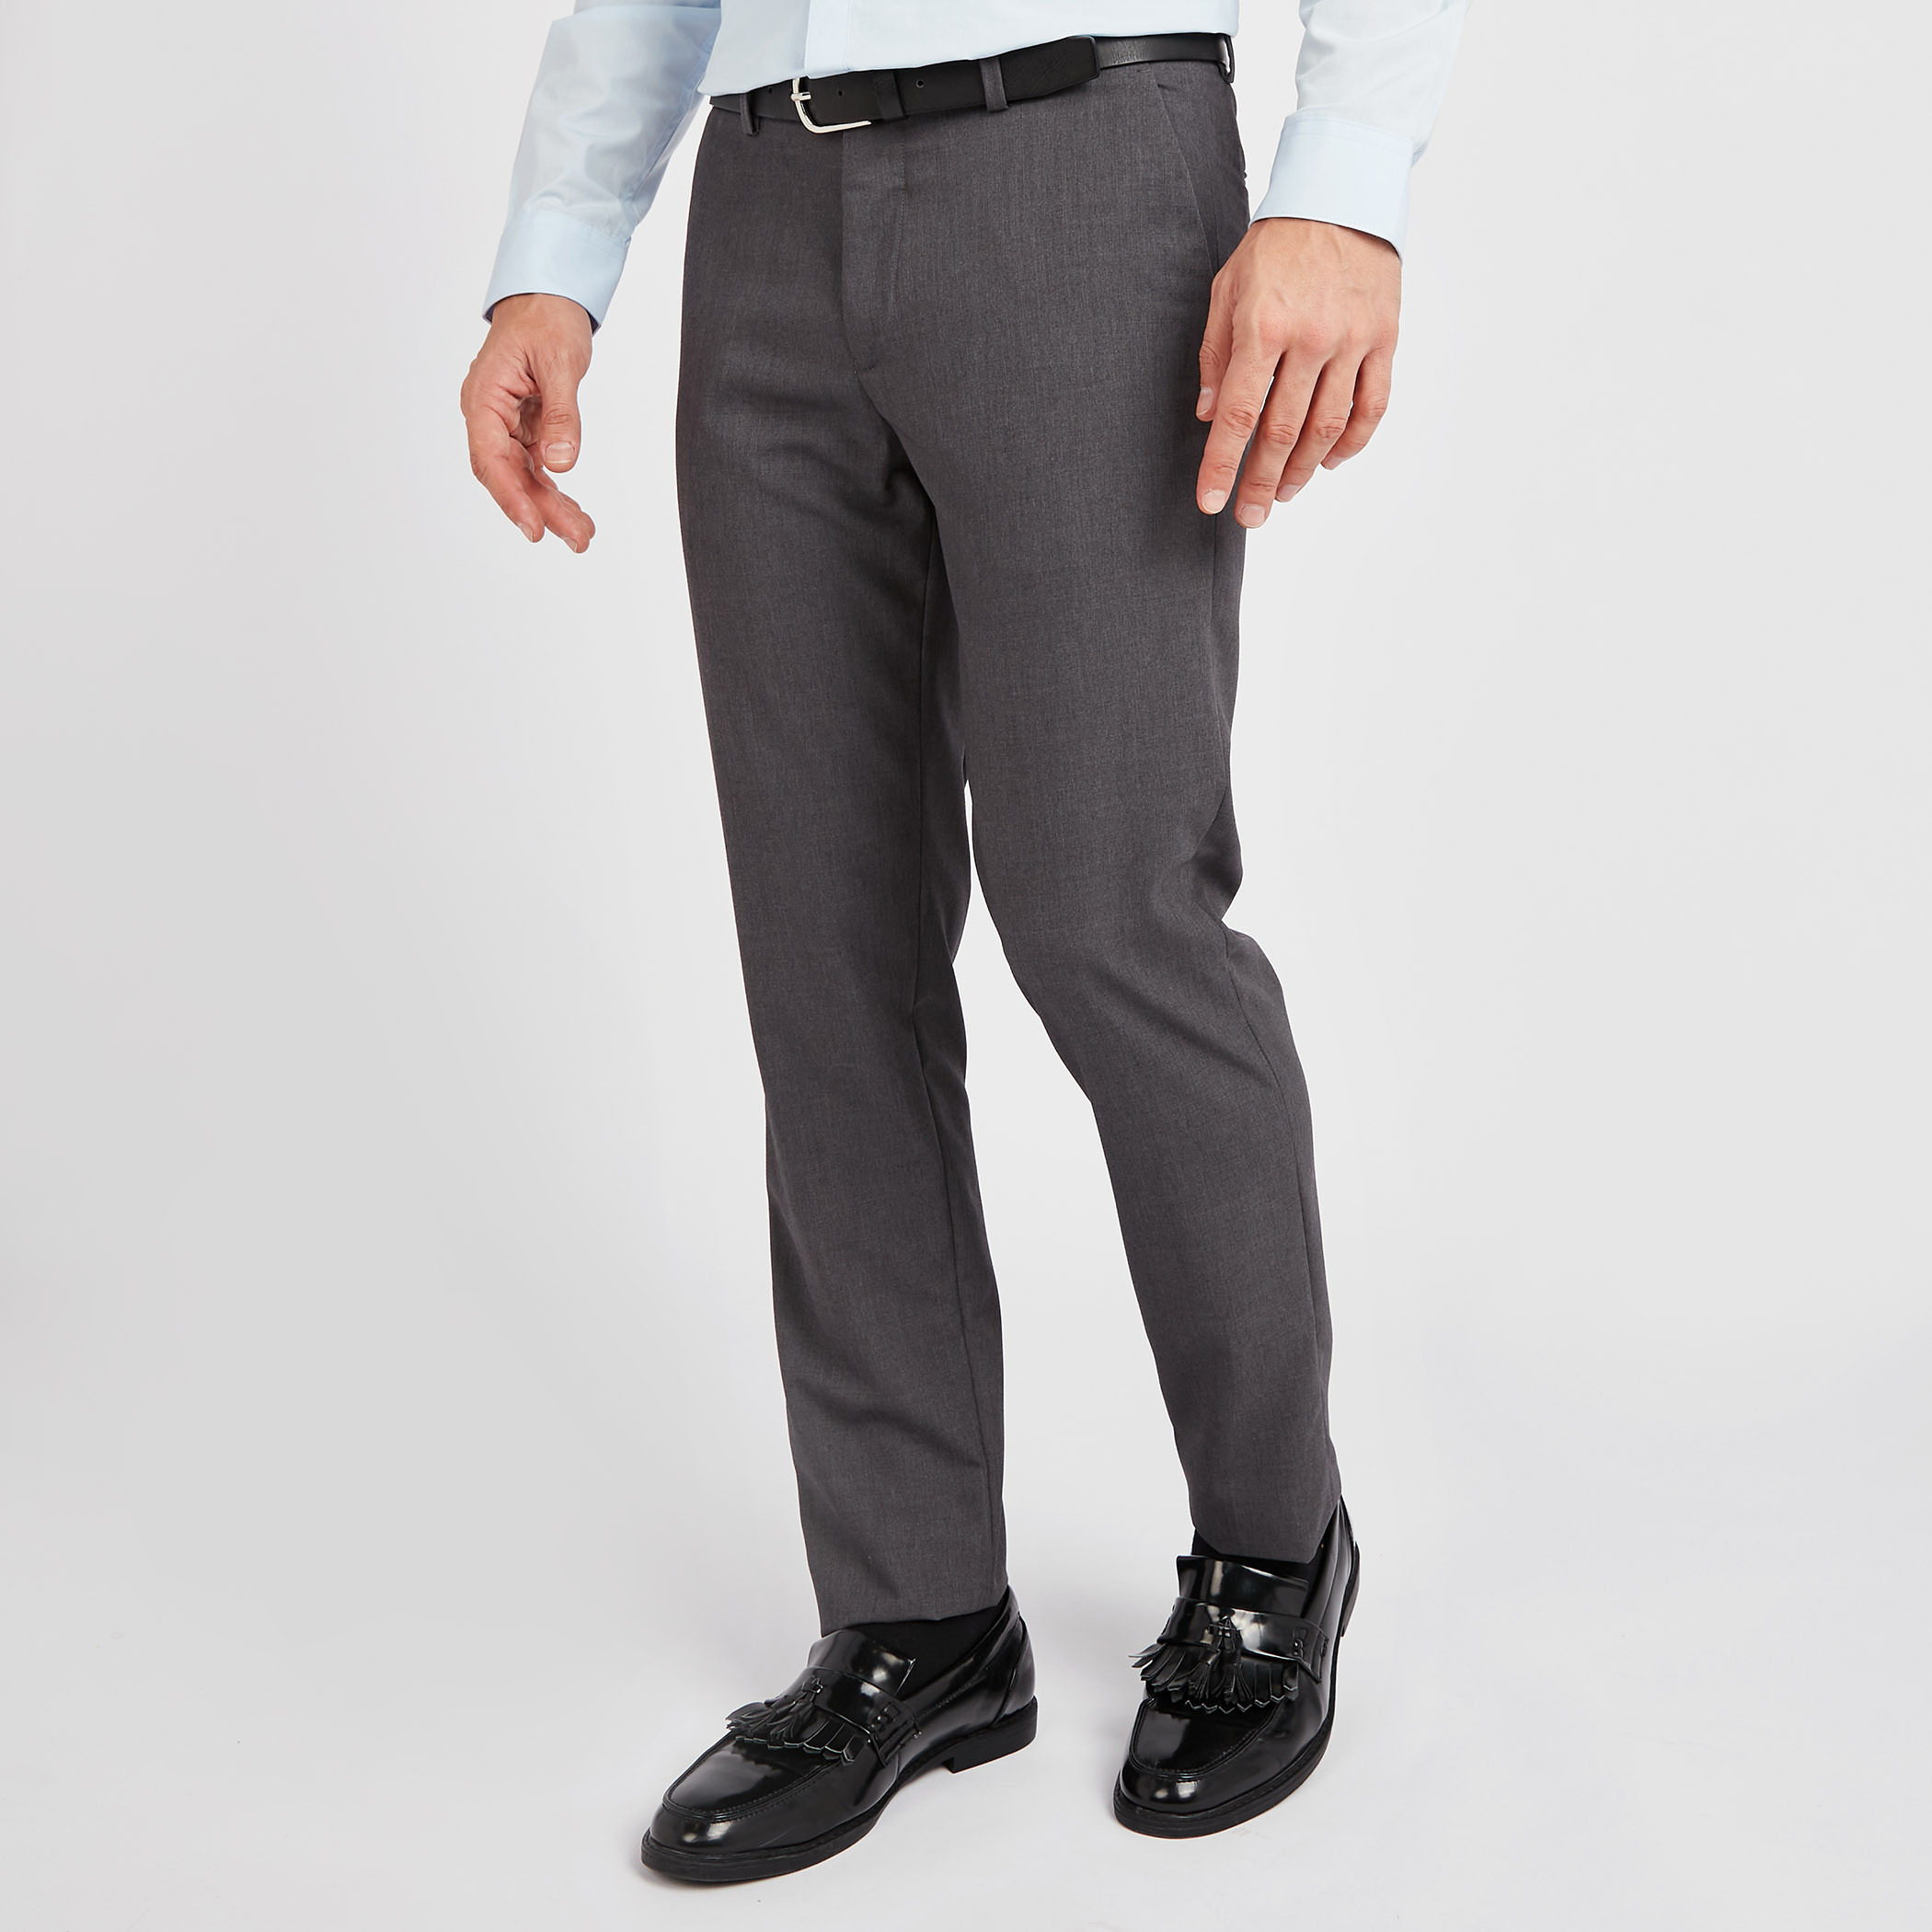 Do I have to wear a belt if my pants have belt loops? | Stitch Fix Men